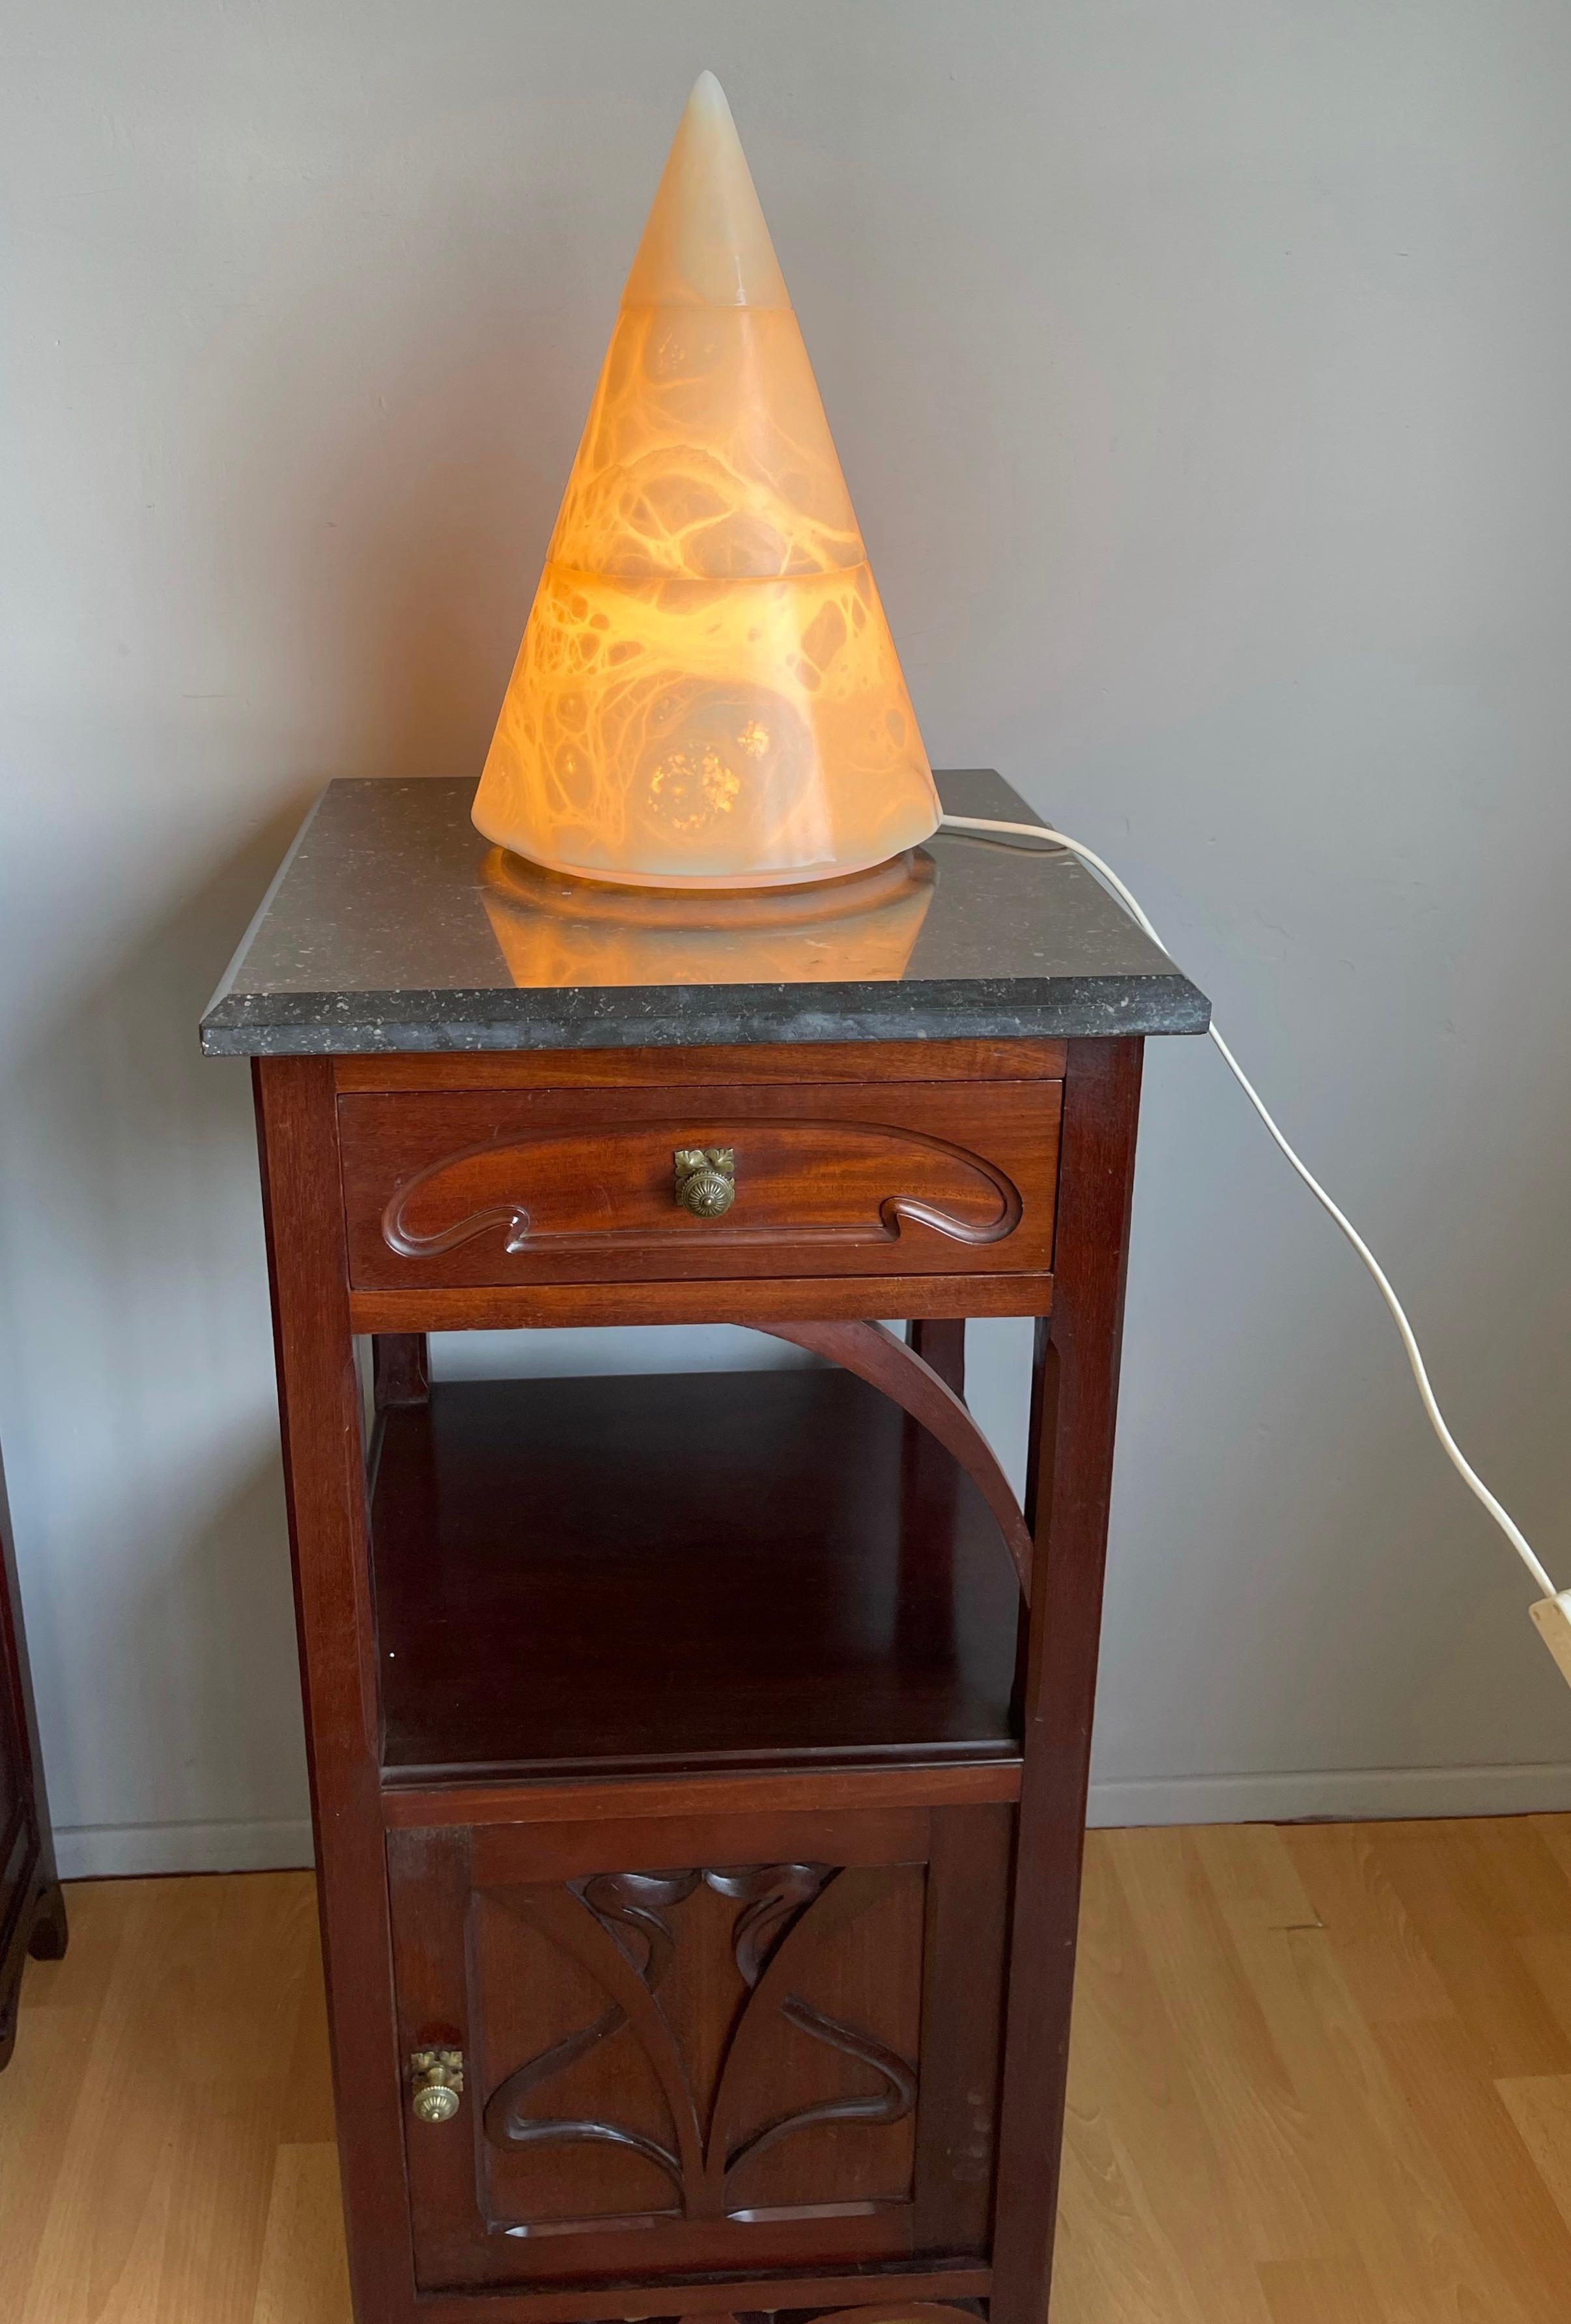 Unique Alabaster Conical Shape Table Lamp / Floor Lamp Light Fixture In Good Condition For Sale In Lisse, NL